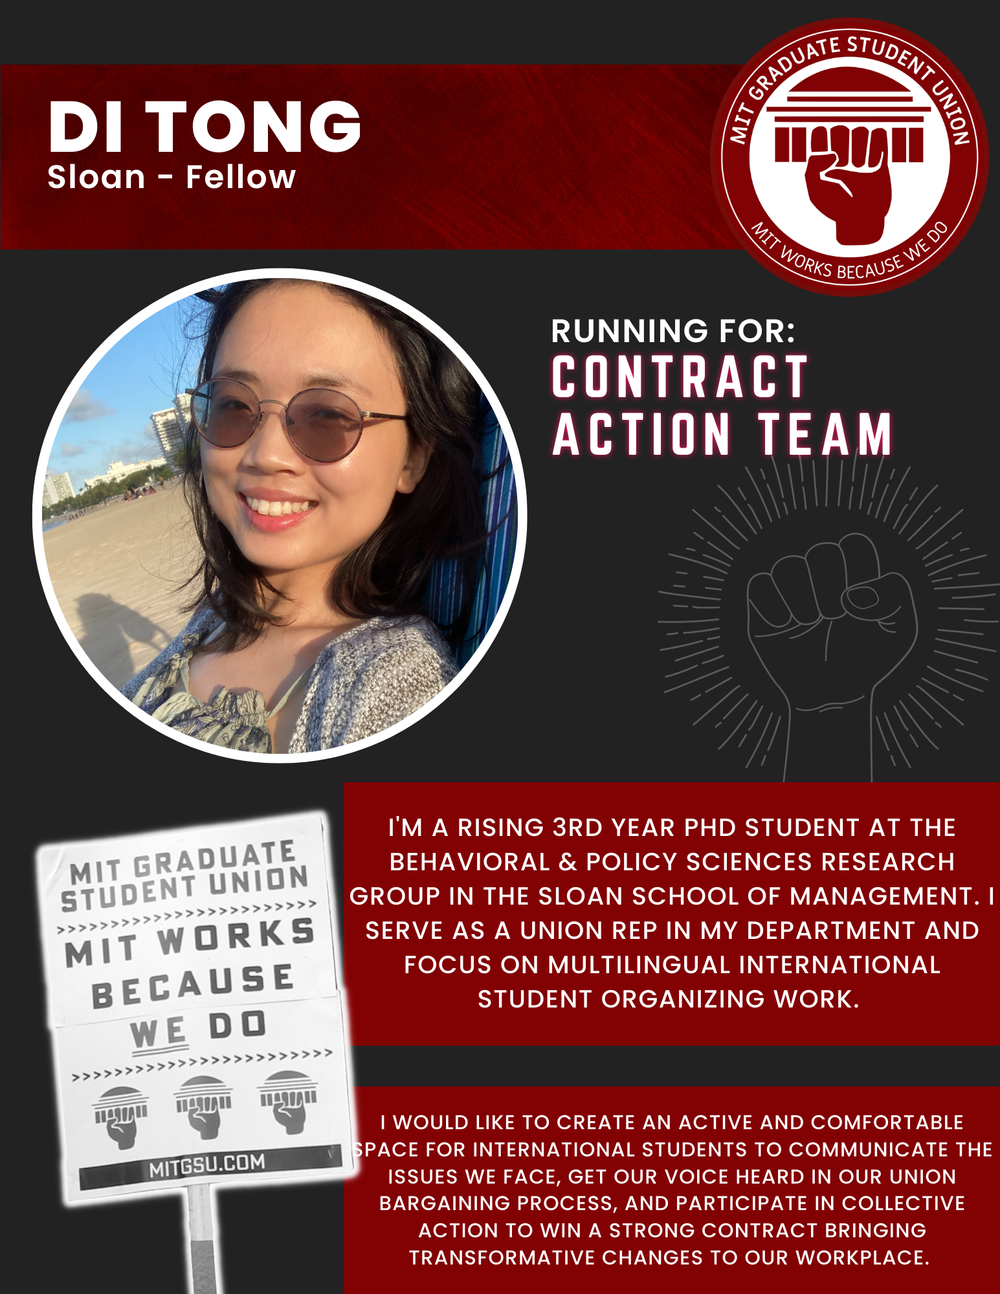  DI TONG Sloan - Fellow   RUNNING FOR: Contract Action Team  I'M A RISING 3RD YEAR PHD STUDENT AT THE BEHAVIORAL &amp; POLICY SCIENCES RESEARCH GROUP IN THE SLOAN SCHOOL OF MANAGEMENT. I SERVE AS A UNION REP IN MY DEPARTMENT AND FOCUS ON MULTILINGUAL